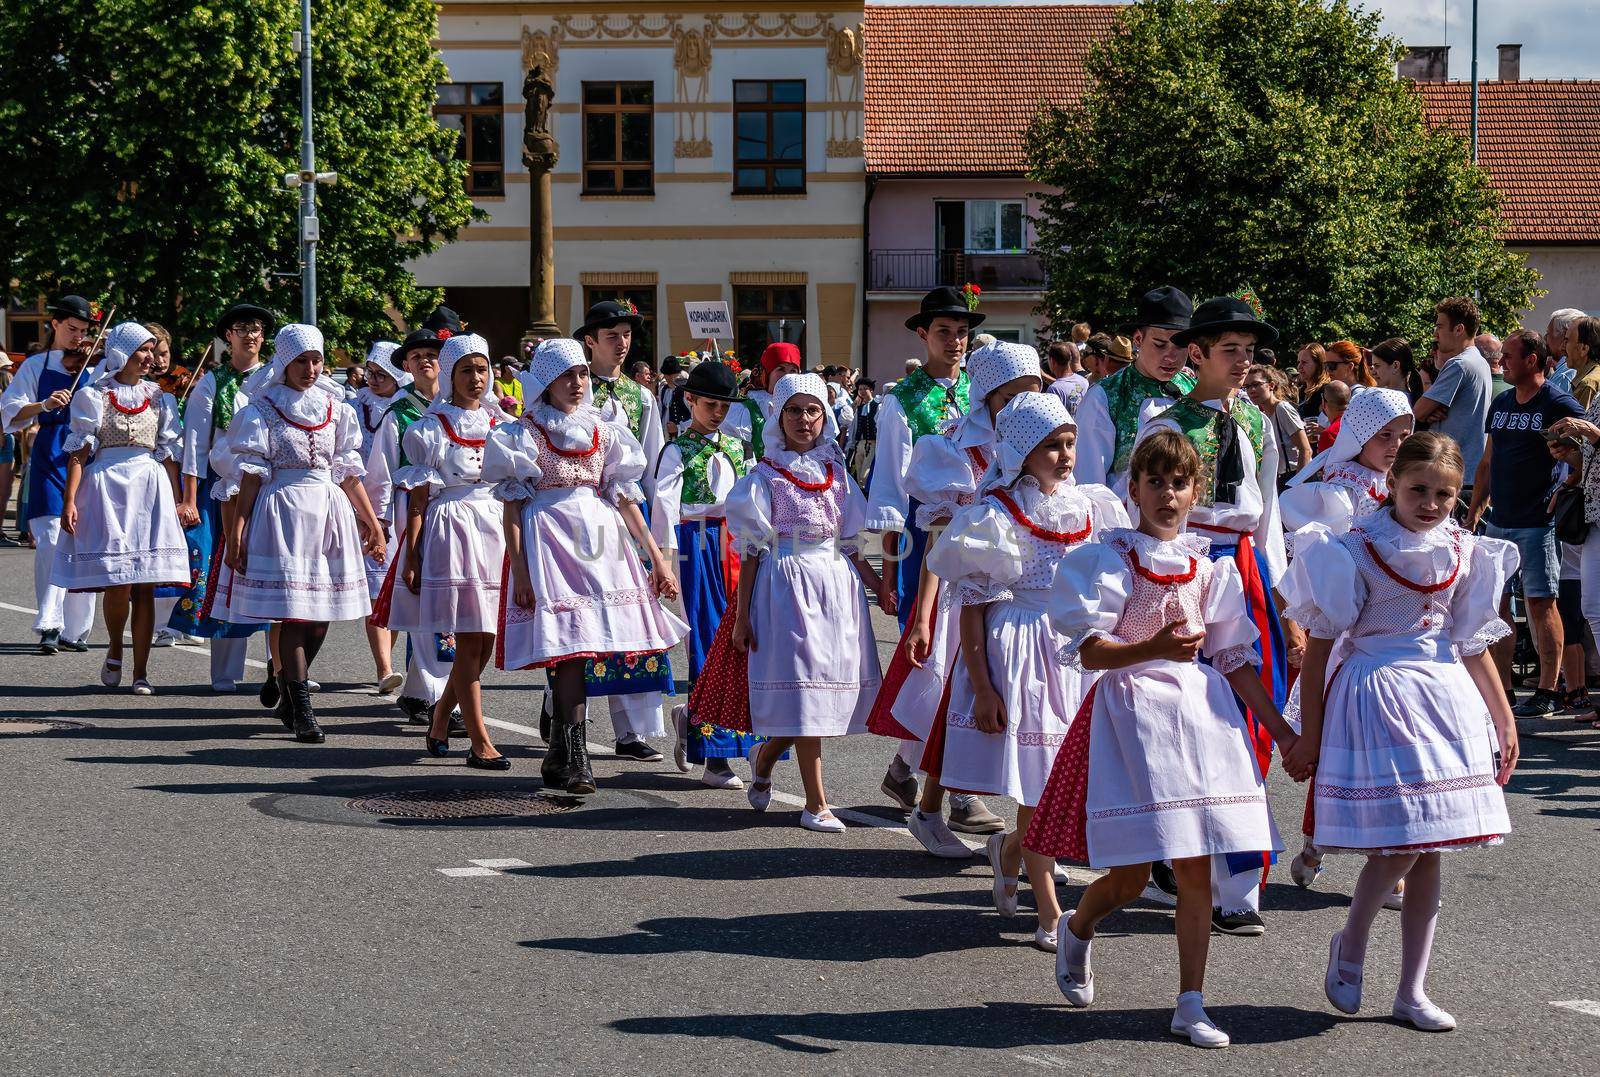 Boys and girls in colorful folk costumes in the procession by rostik924